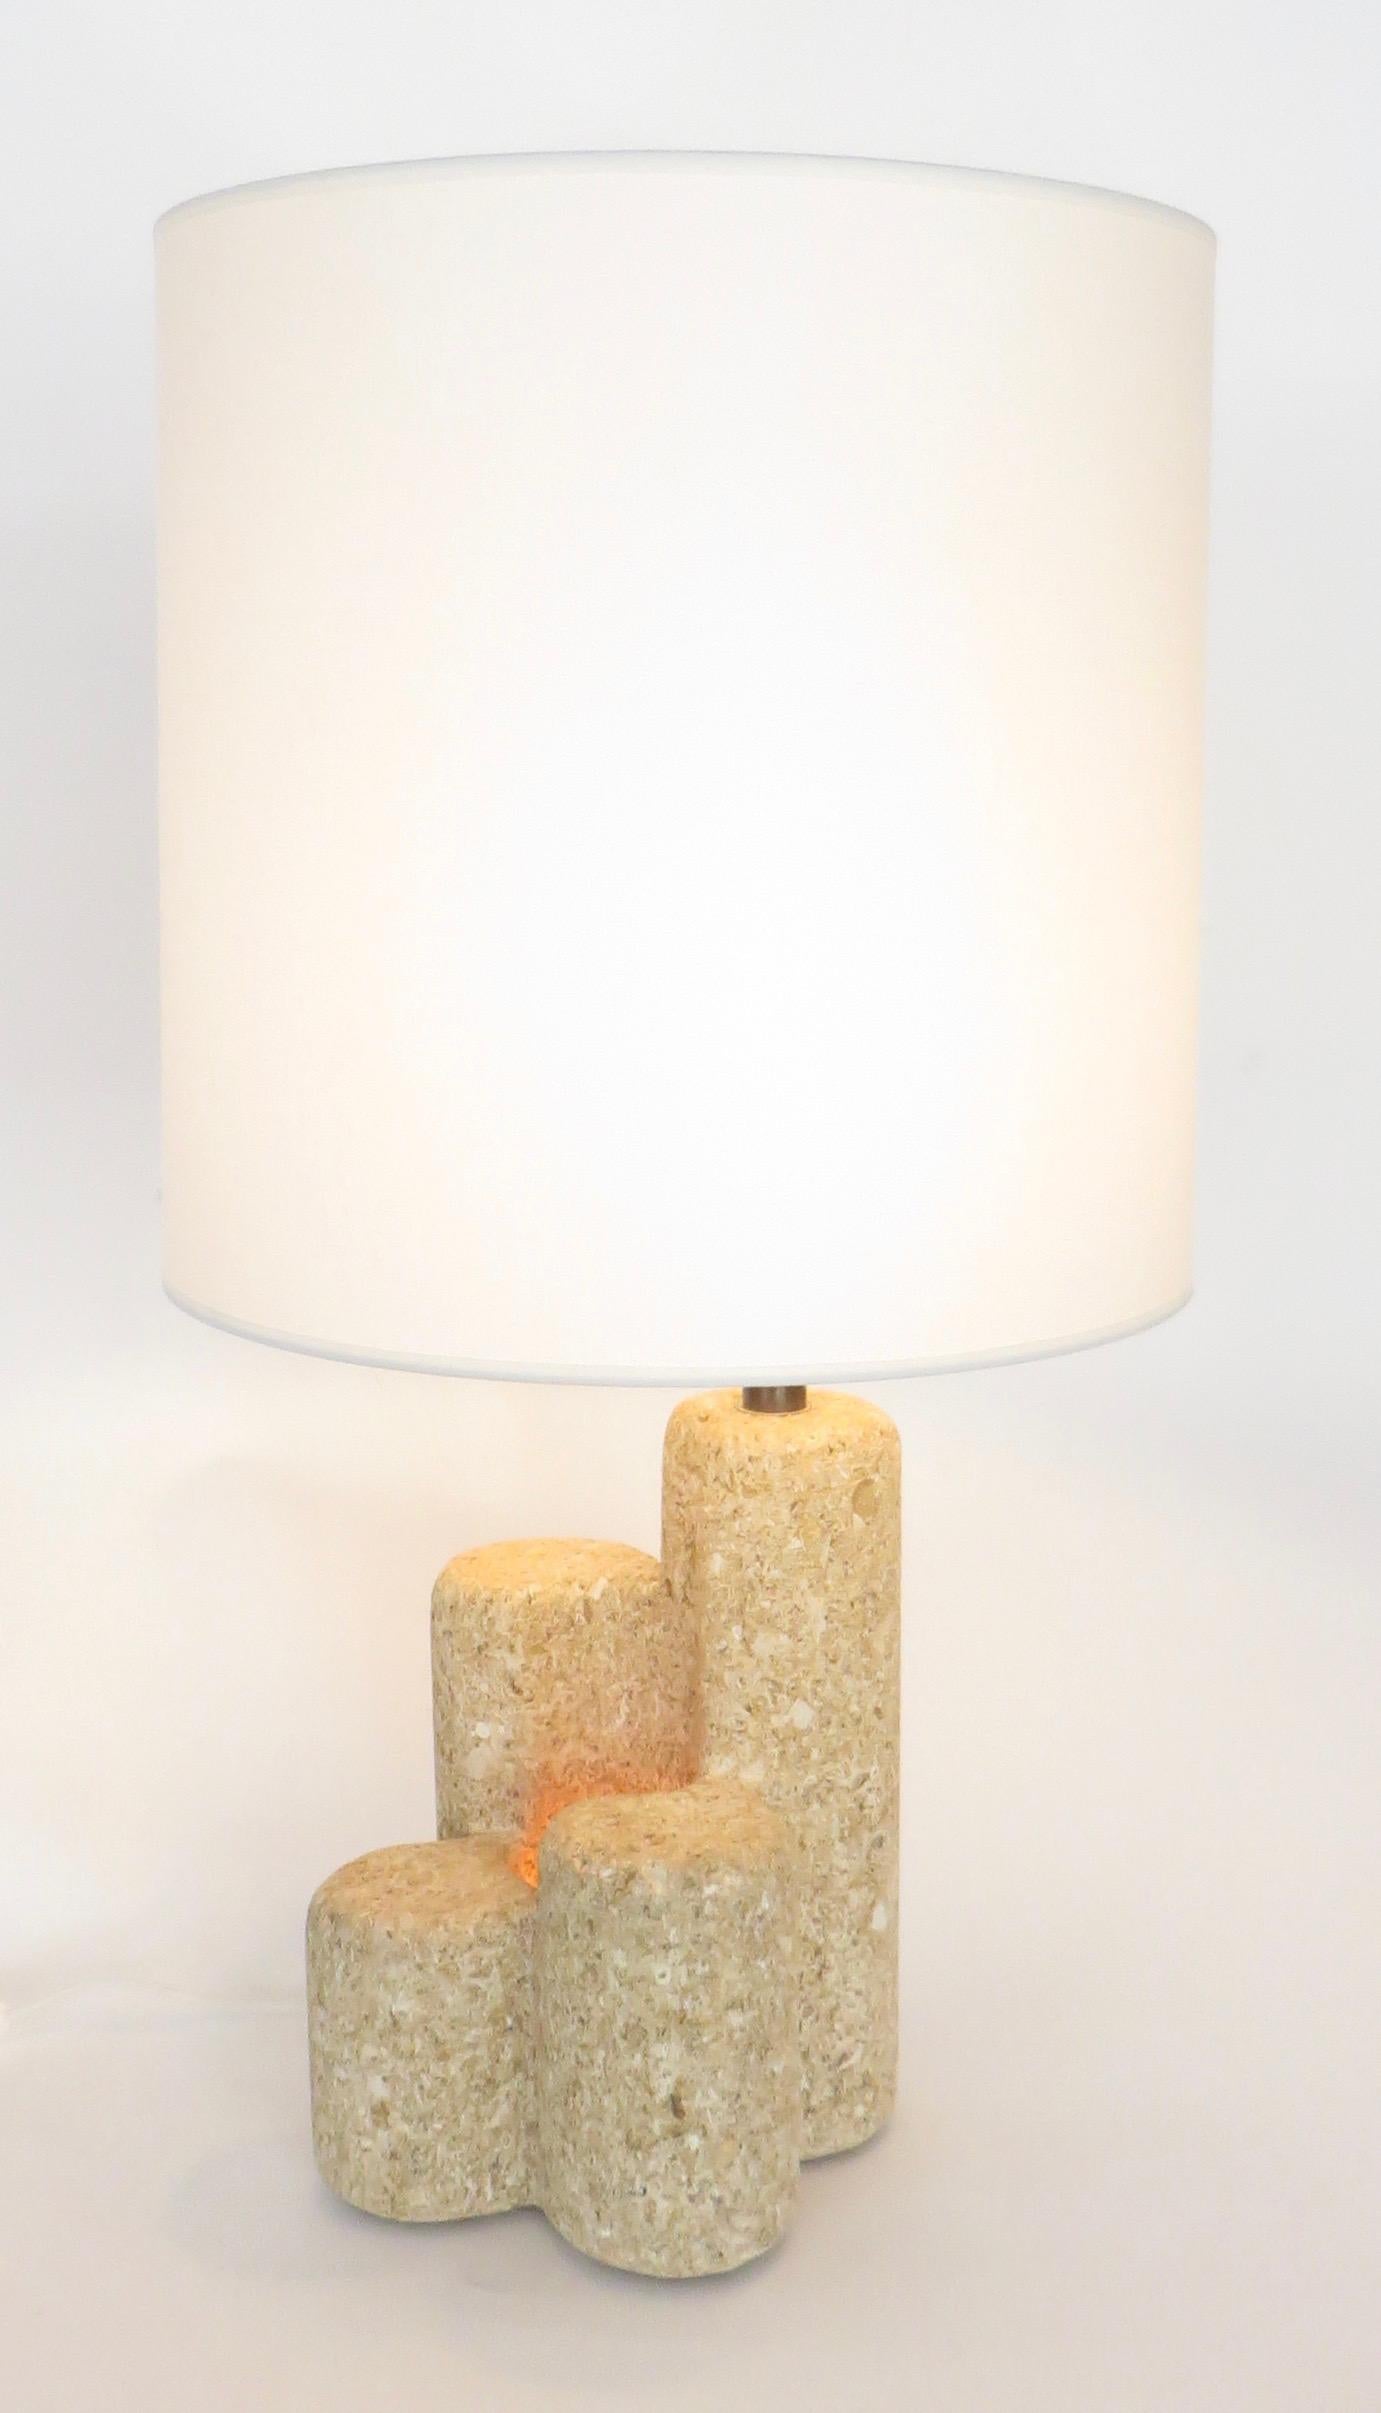 French limestone table lamp in the style of Albert Tormos. Unsigned.
This table lamp has four columns of french limestone or buffa with one internal light and one light at the top of the lamp.
The French lampshade is offset asymmetrically to